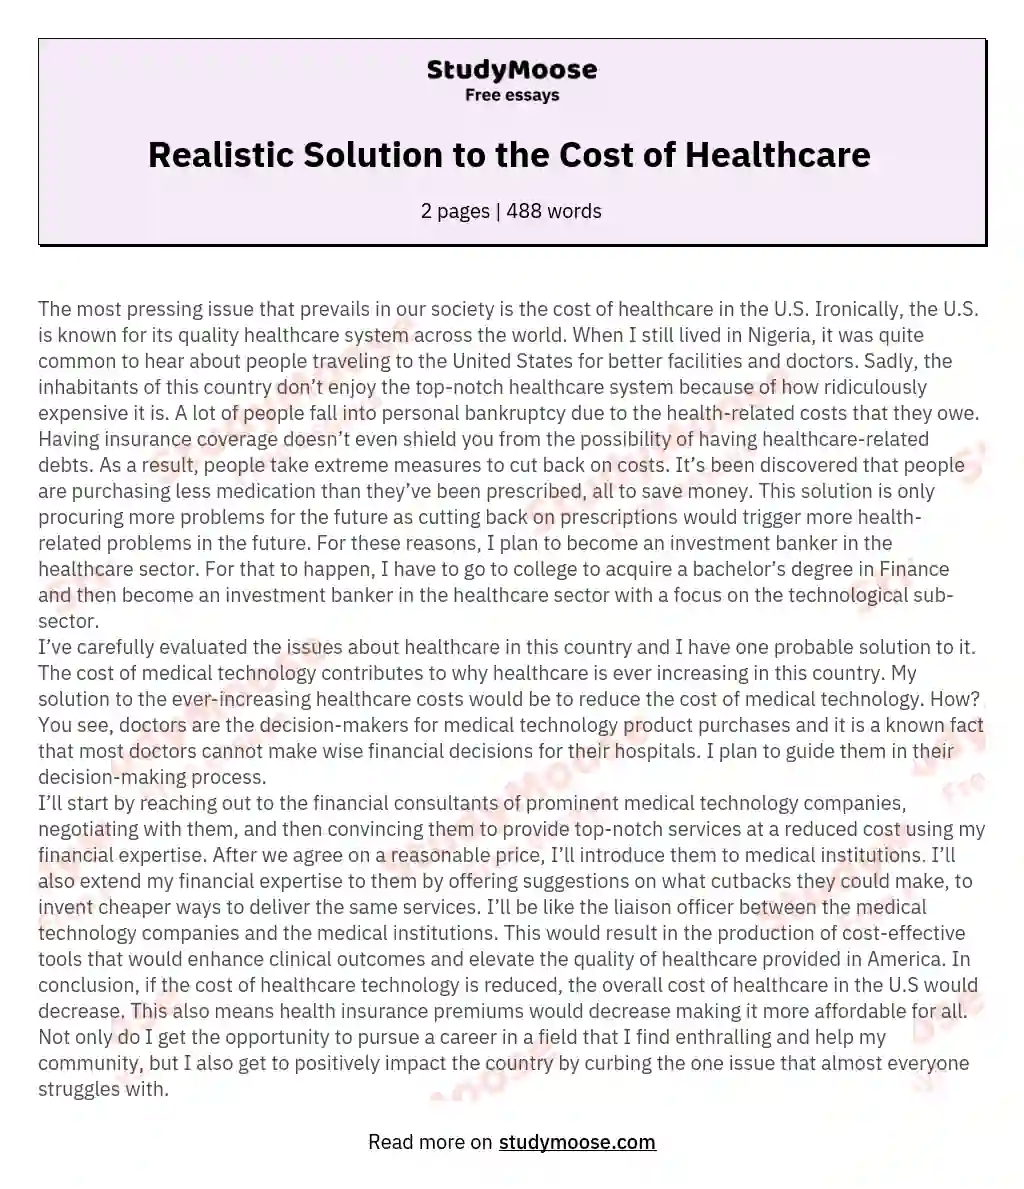 Realistic Solution to the Cost of Healthcare  essay